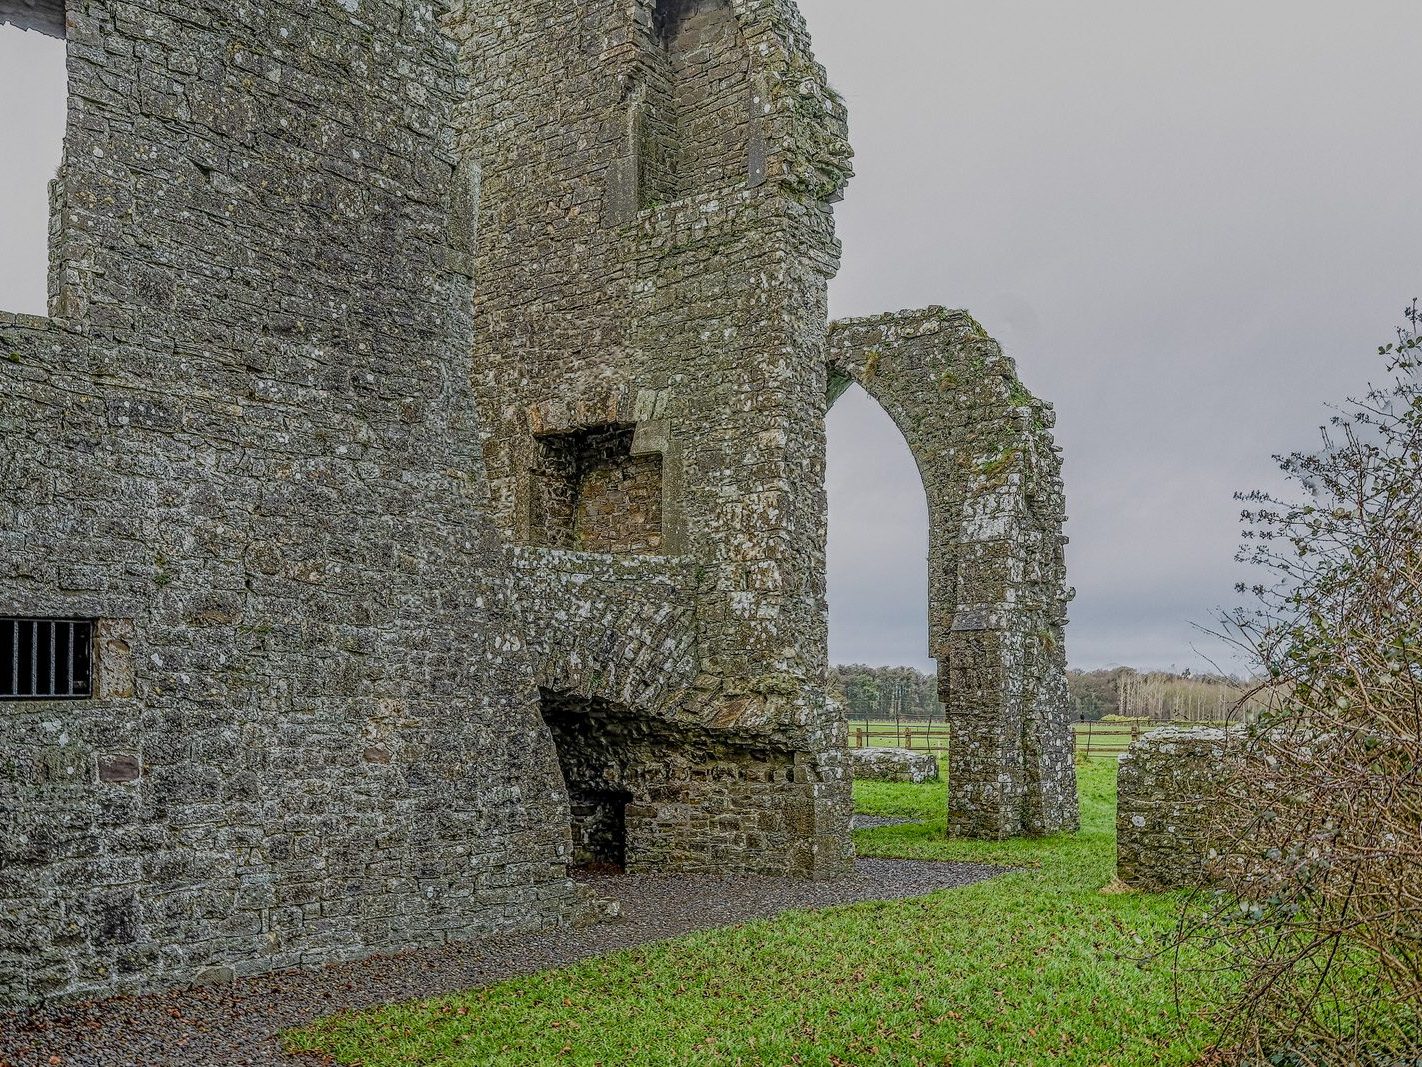 BECTIVE ABBEY WHICH I VISITED LAST CHRISTMAS [THERE WERE NO OTHER VISITORS AS IT WAS A VERY WET DAY]--225217-1